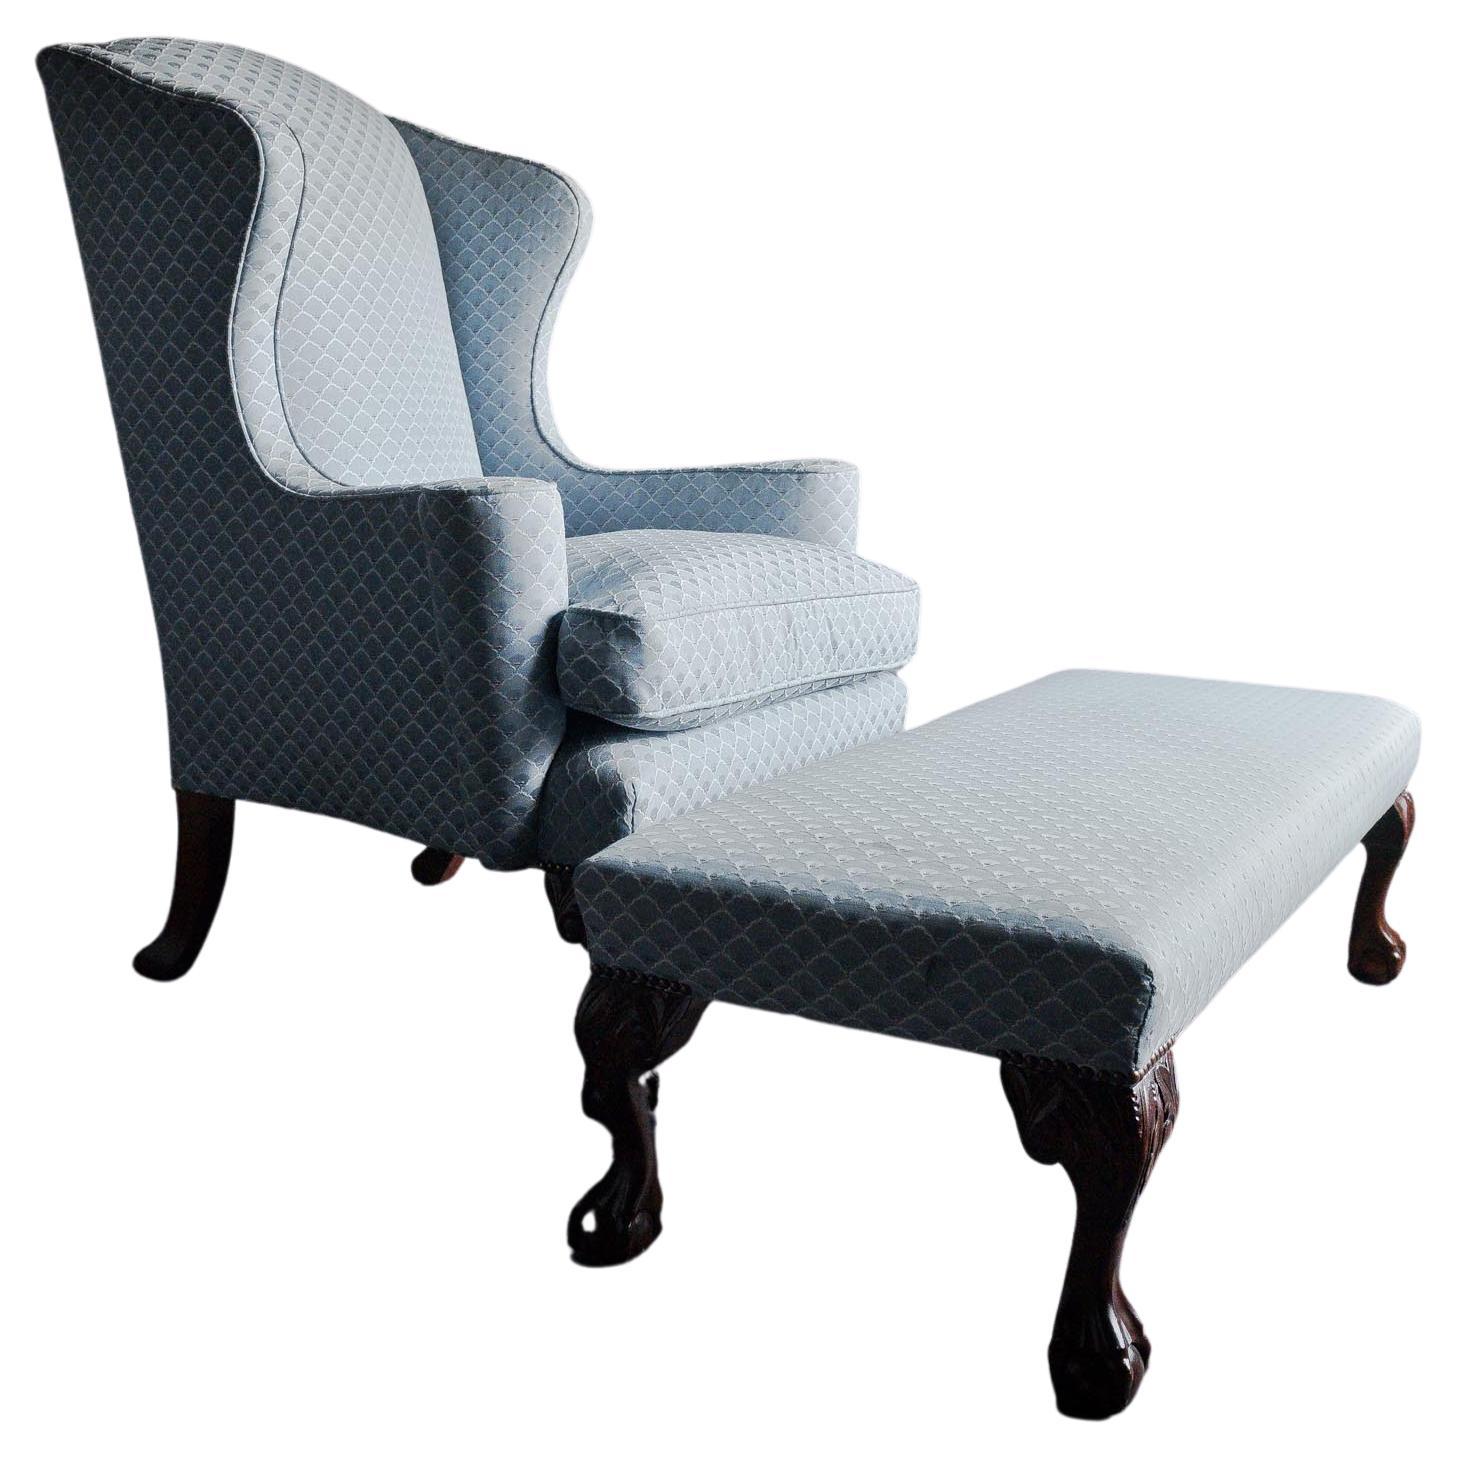 Queen Anne Wing Back Chair and Stool